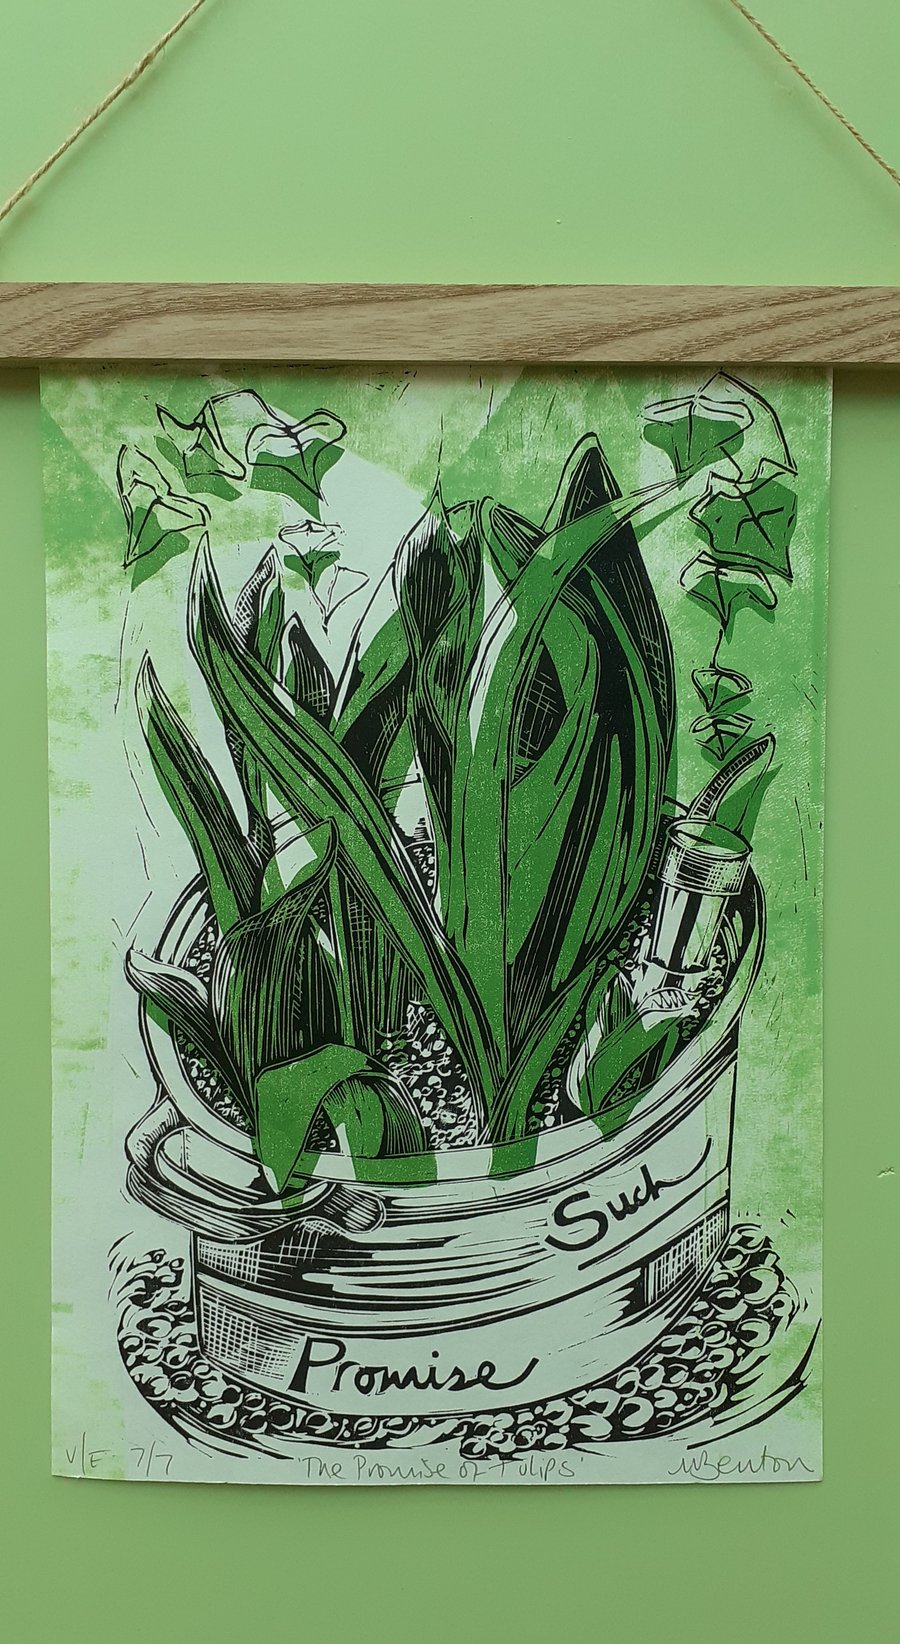 'The Promise of Tulips', Two Block Lino Print over Green (VE no.7 of 7)